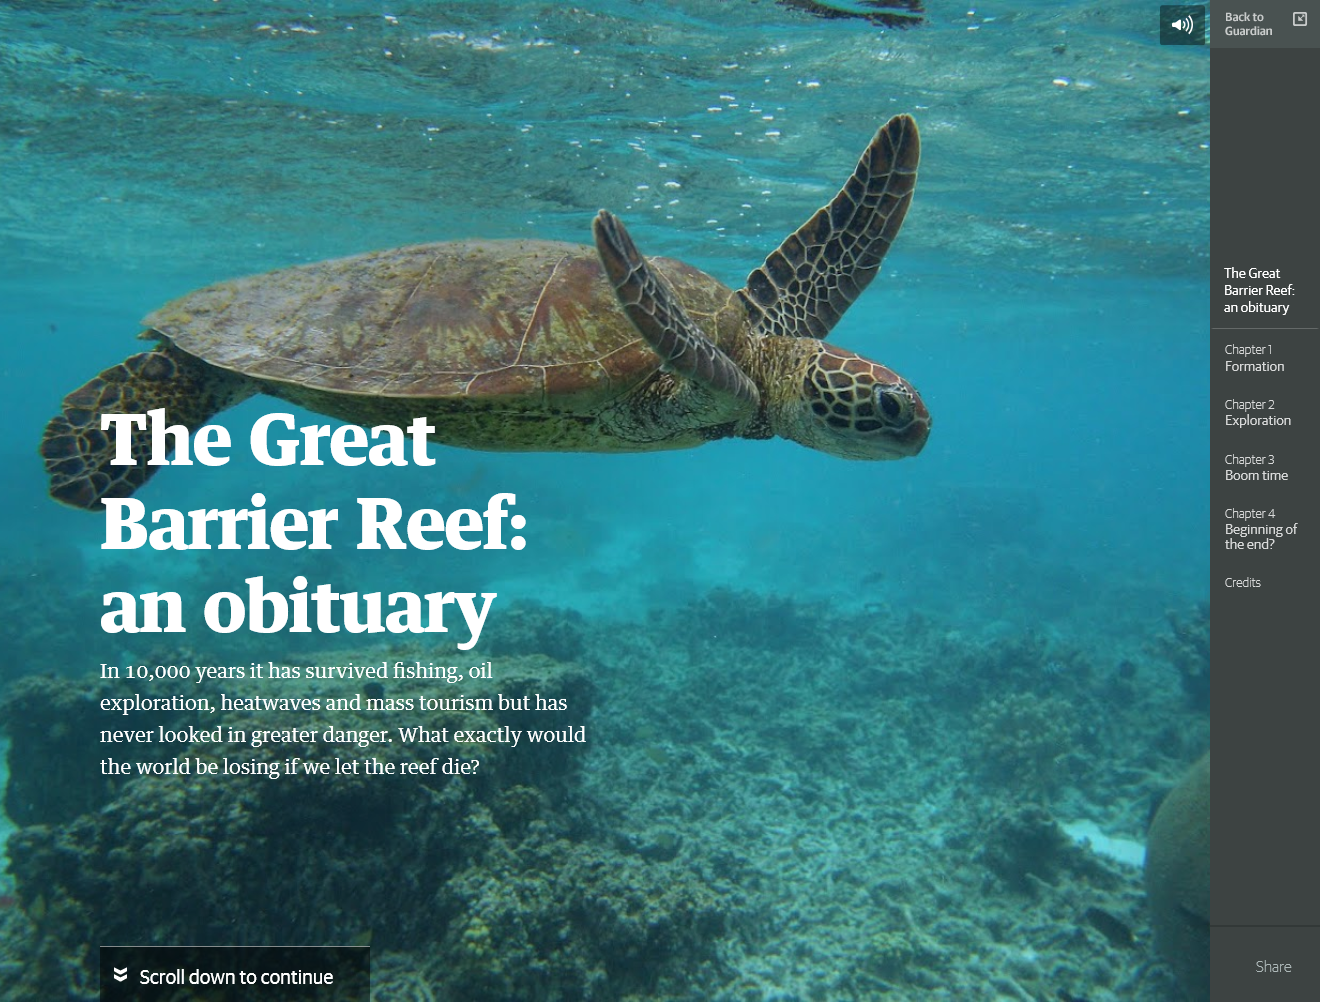 The_Great_Barrier_Reef_an_obituary_Environment_theguardian.com_-_2014-03-29_10.57.17